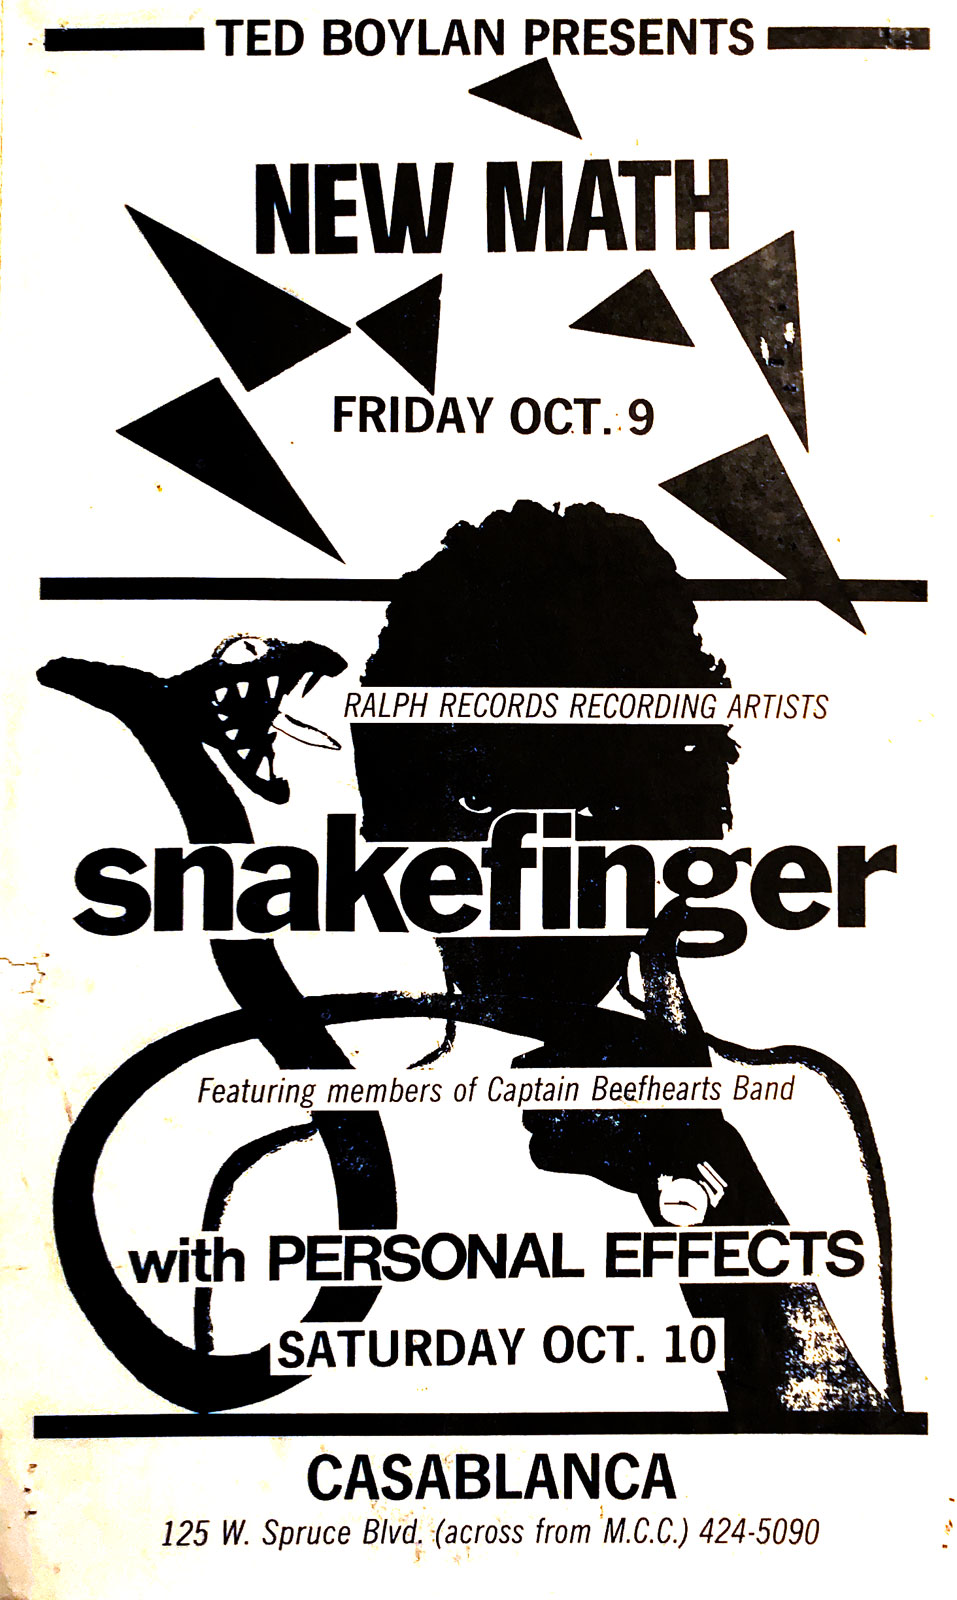 Poster for Snakefinger with Personal Effects at Casablanca in Rochester, New York on 10.12.1985. A Ted Boylan Production. New Math played the same club the night before.